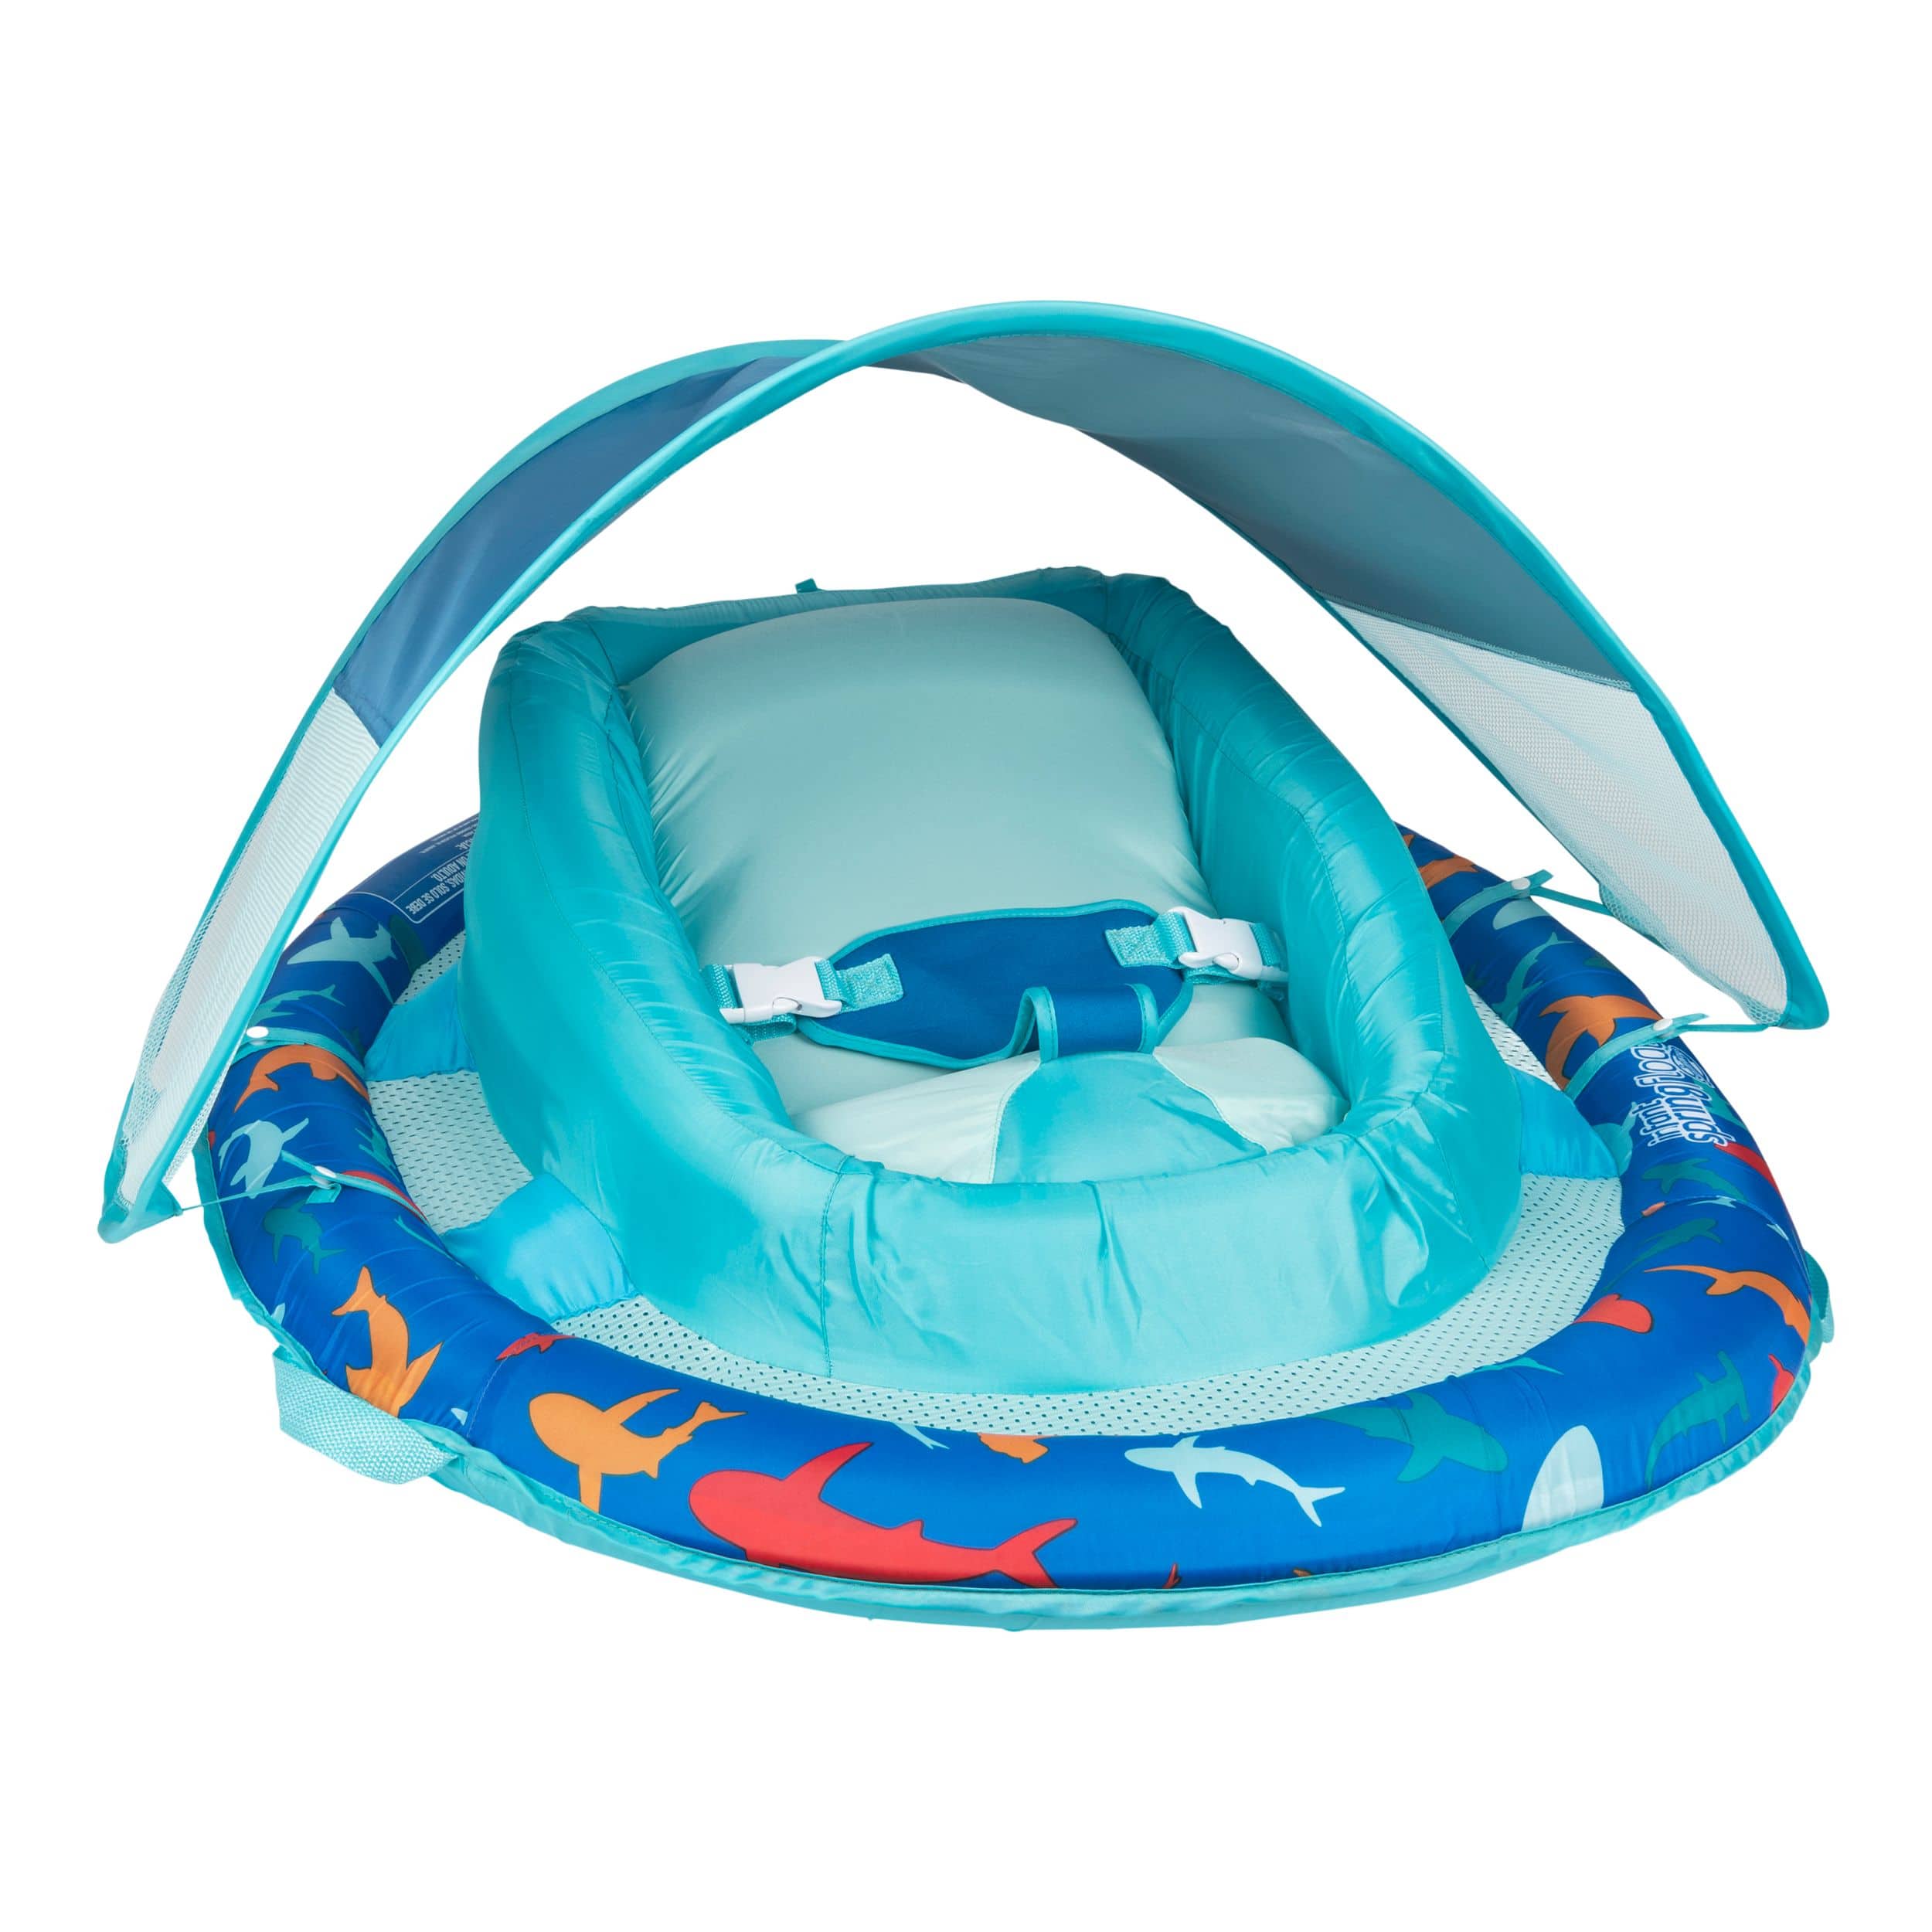 Swimways Floating UV-Protected Infant Spring Float with Handles